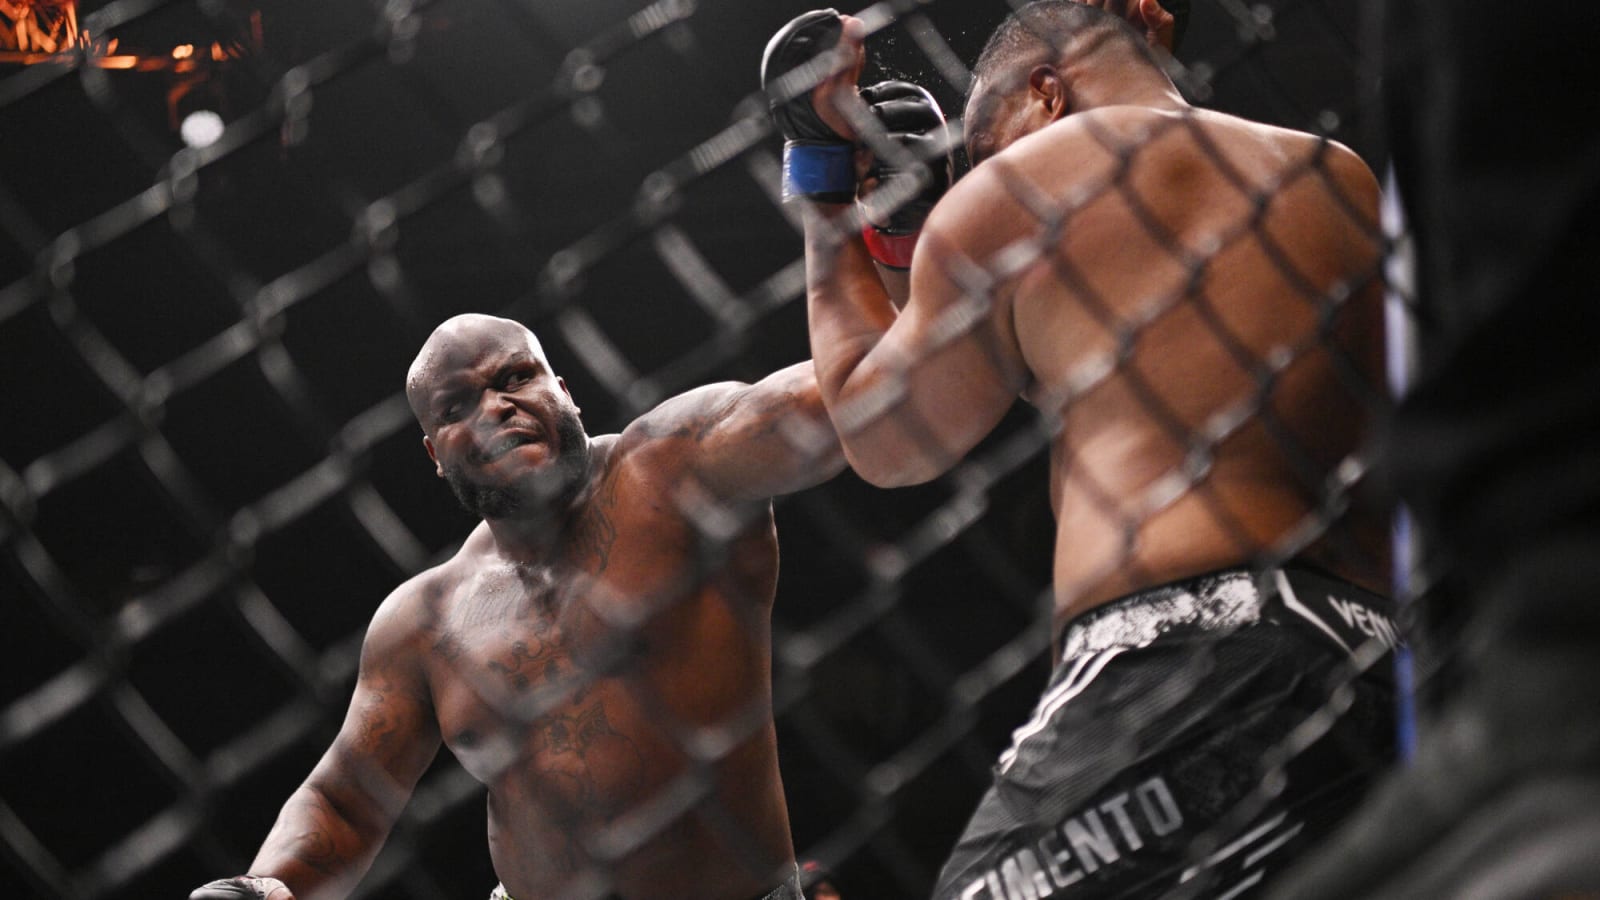 “Couldn’t let Taxi driver from Brazil beat me!” Derrick Lewis hilariously reacts to KO win against ‘unknown’ opponent at UFC St. Louis